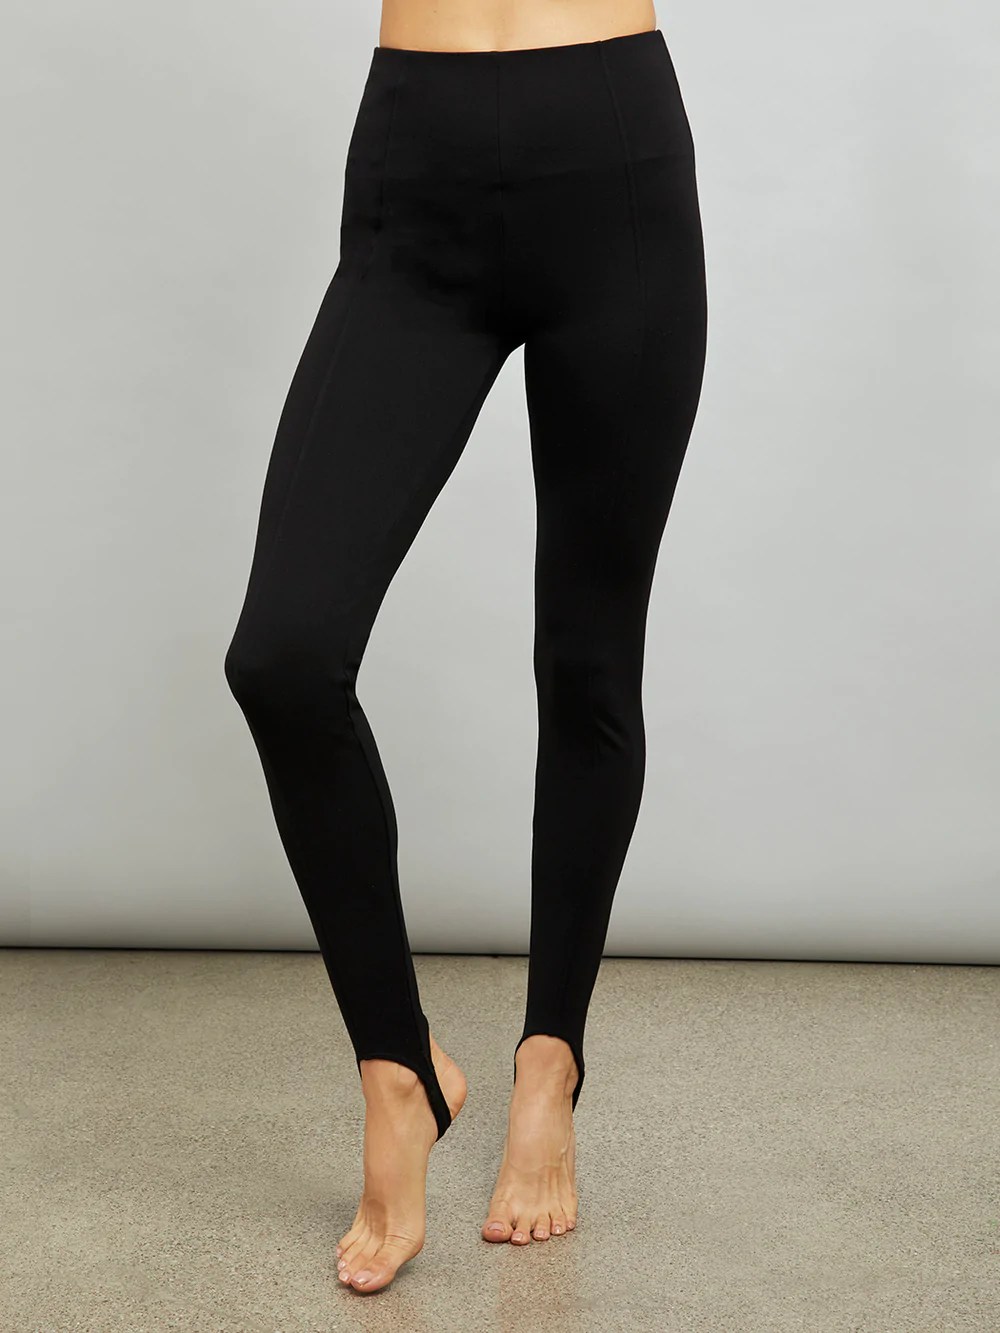 10 Stirrup Leggings That Actually Stay In Place | Well+Good